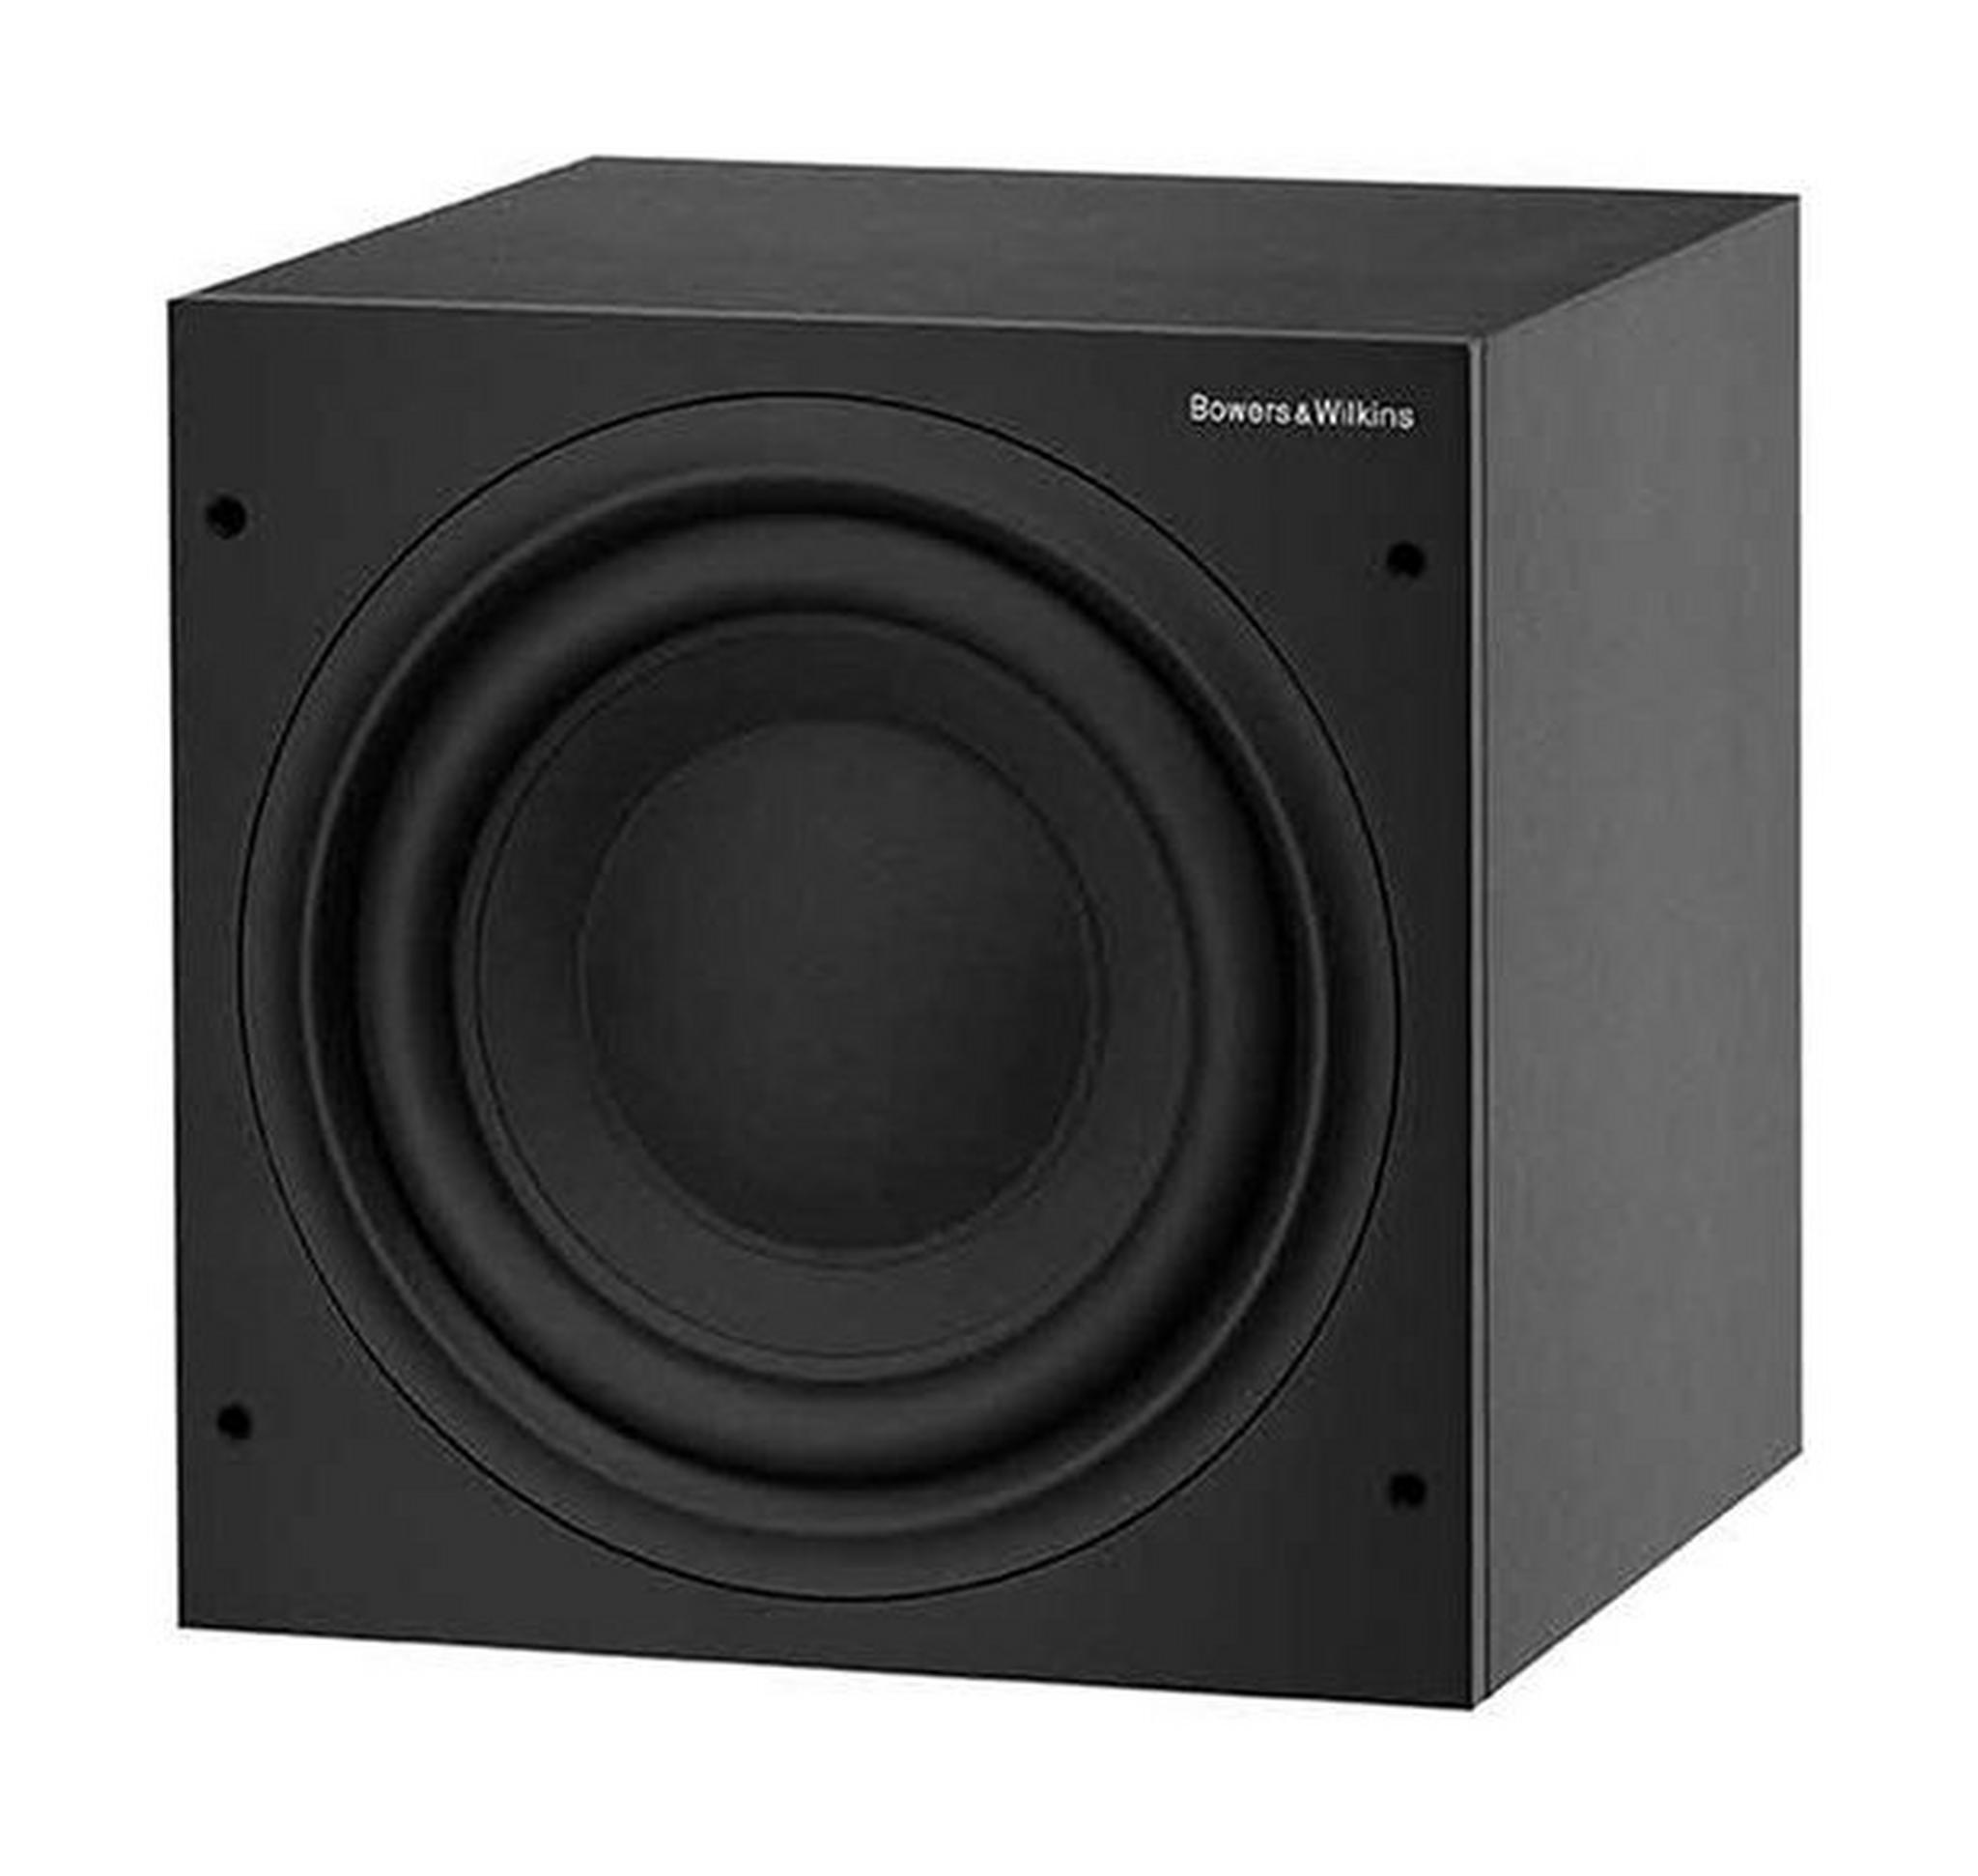 Bowers & Wilkins 600 Series 10" 500W Powered Subwoofer - Matte Black